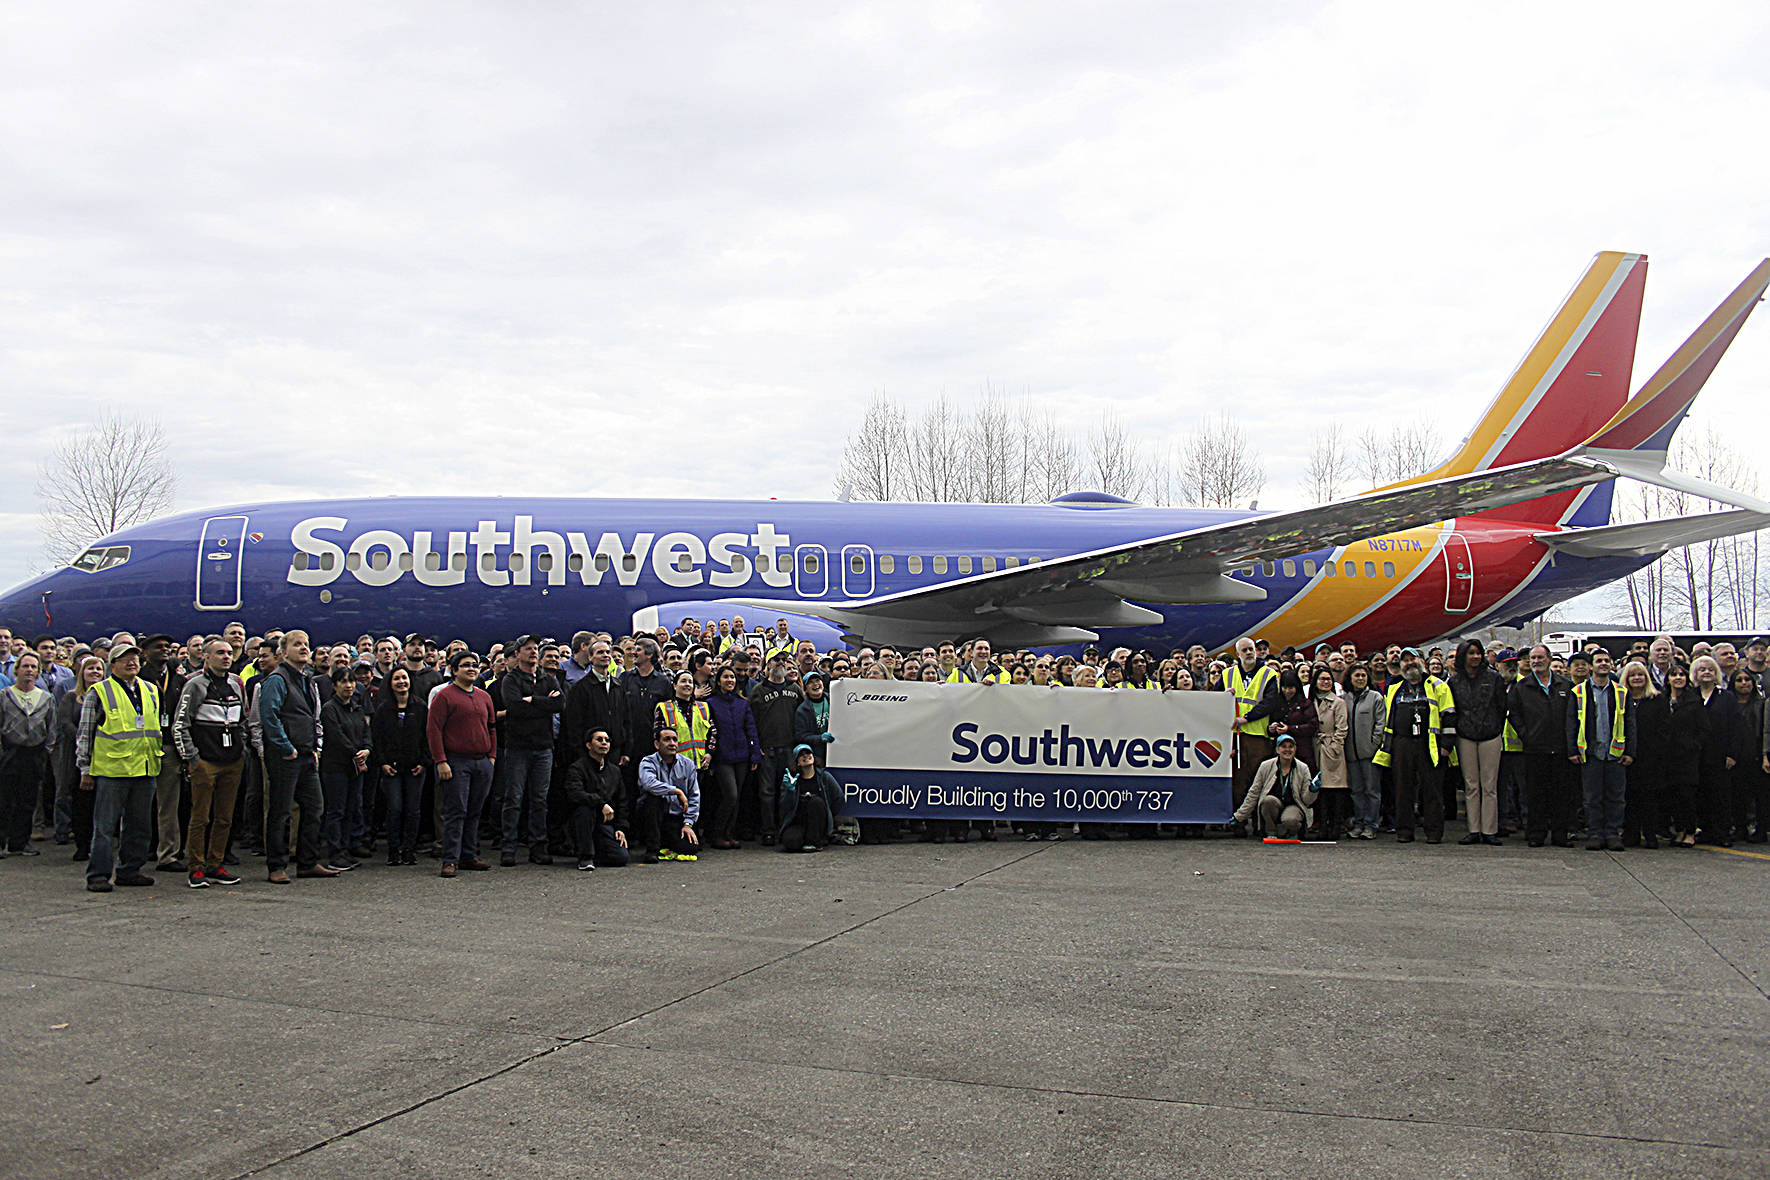 Hundreds of employees gather to celebrate the 10,000th 737 jetliner on March 13. Leah Abraham, Renton Reporter